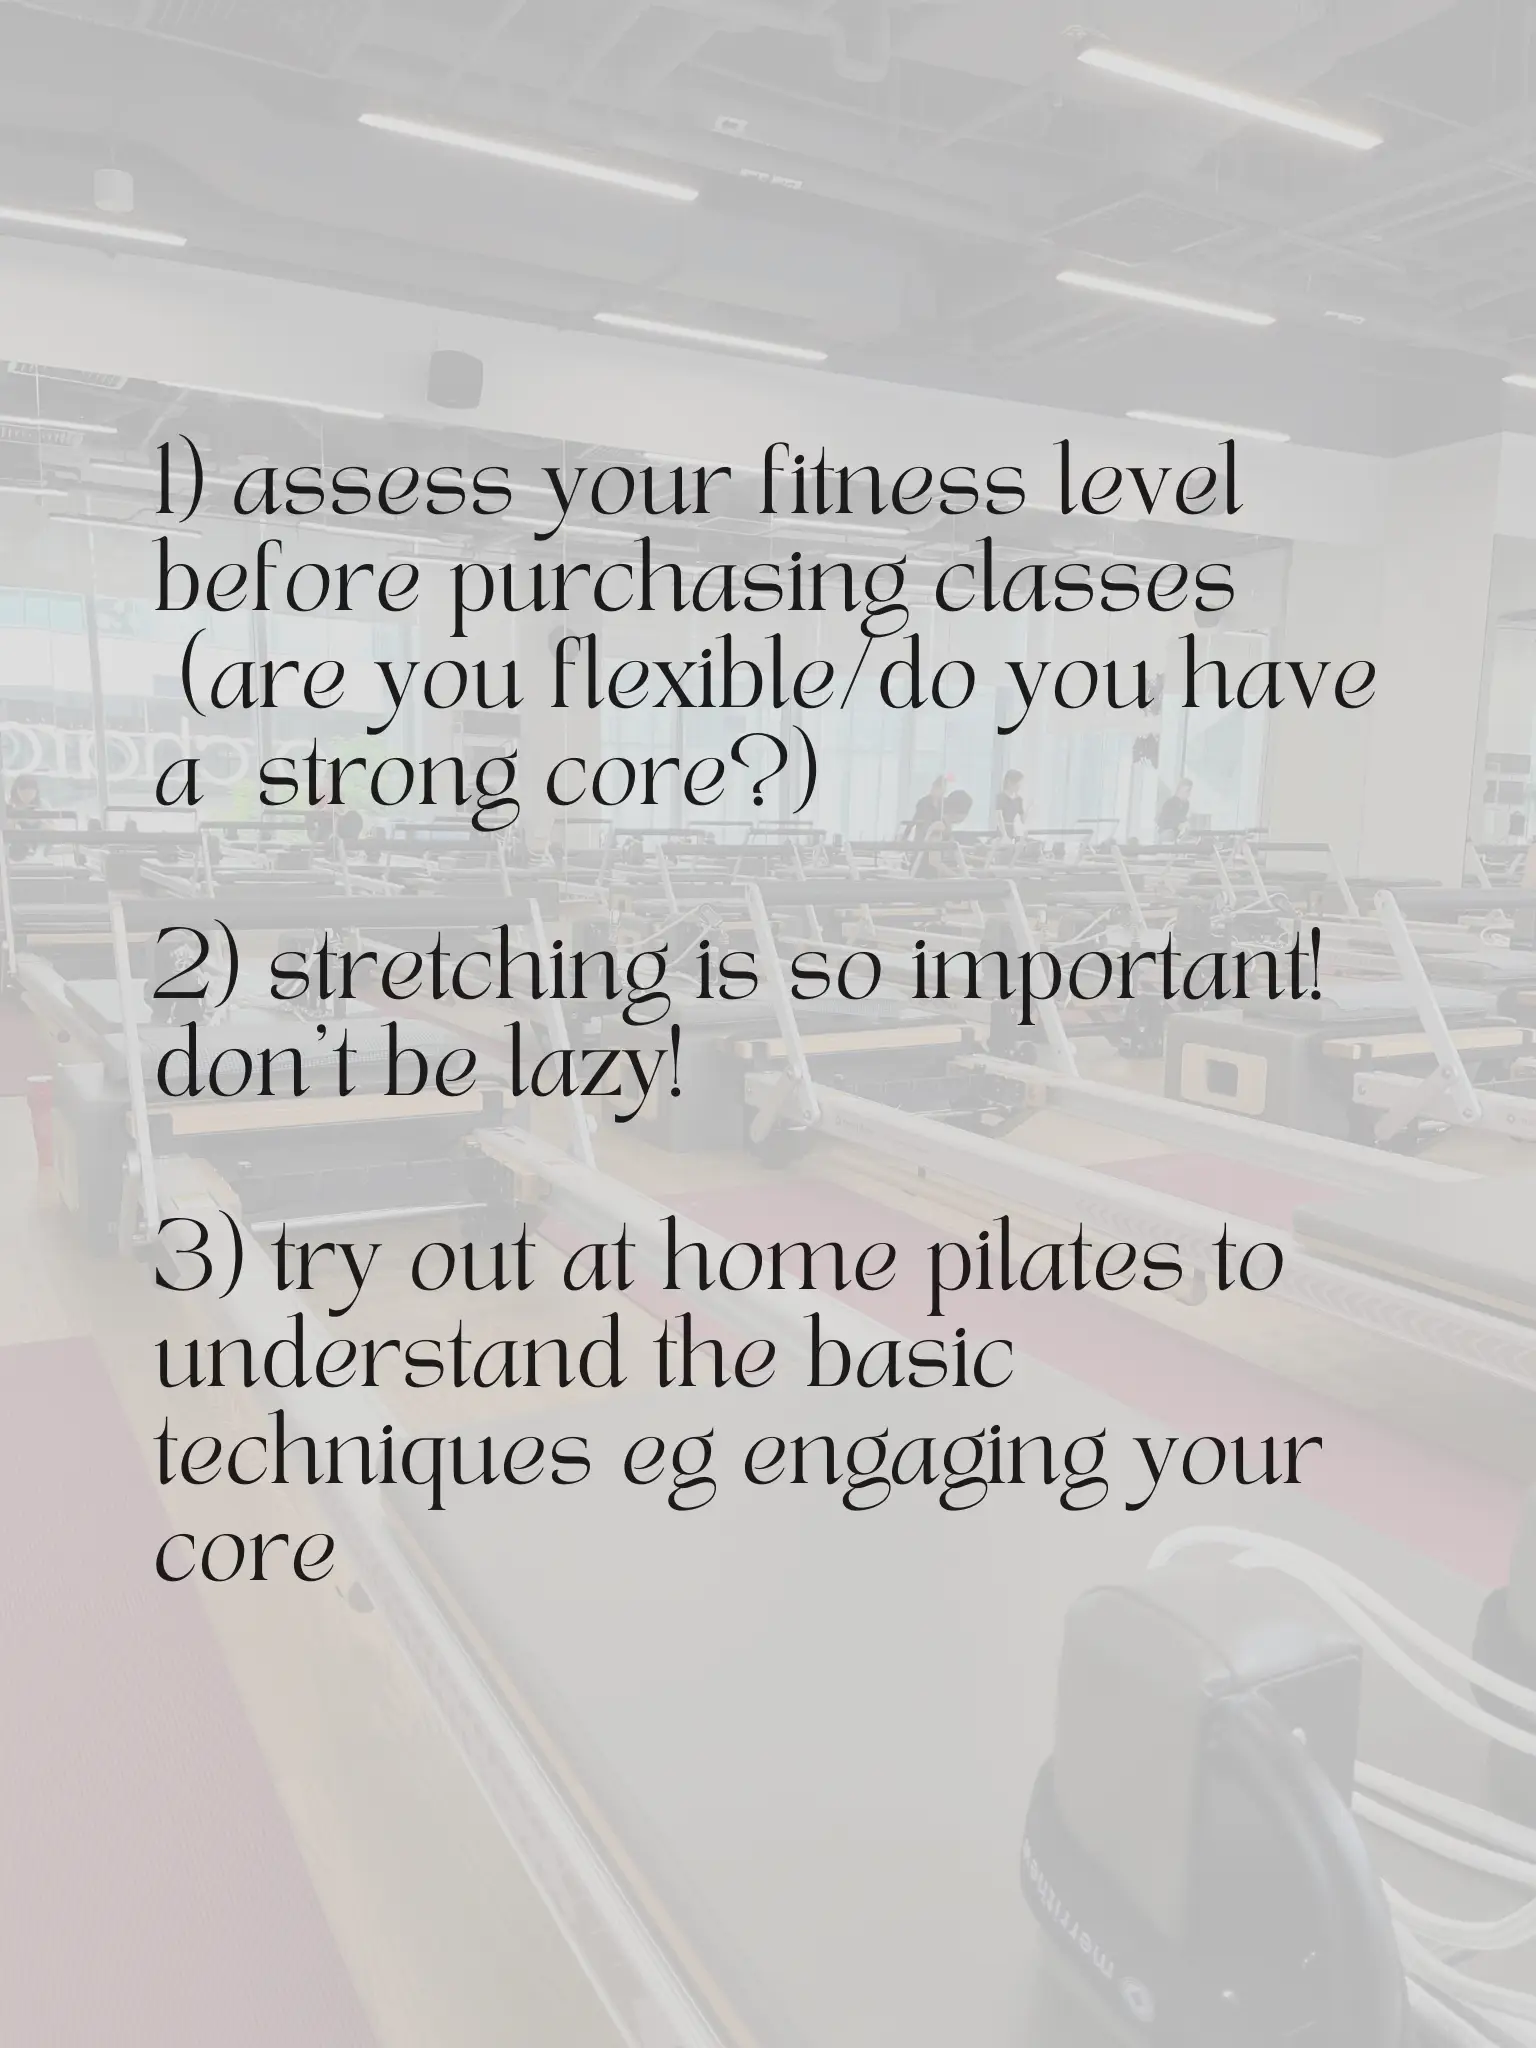 Tips for Pilates at Home